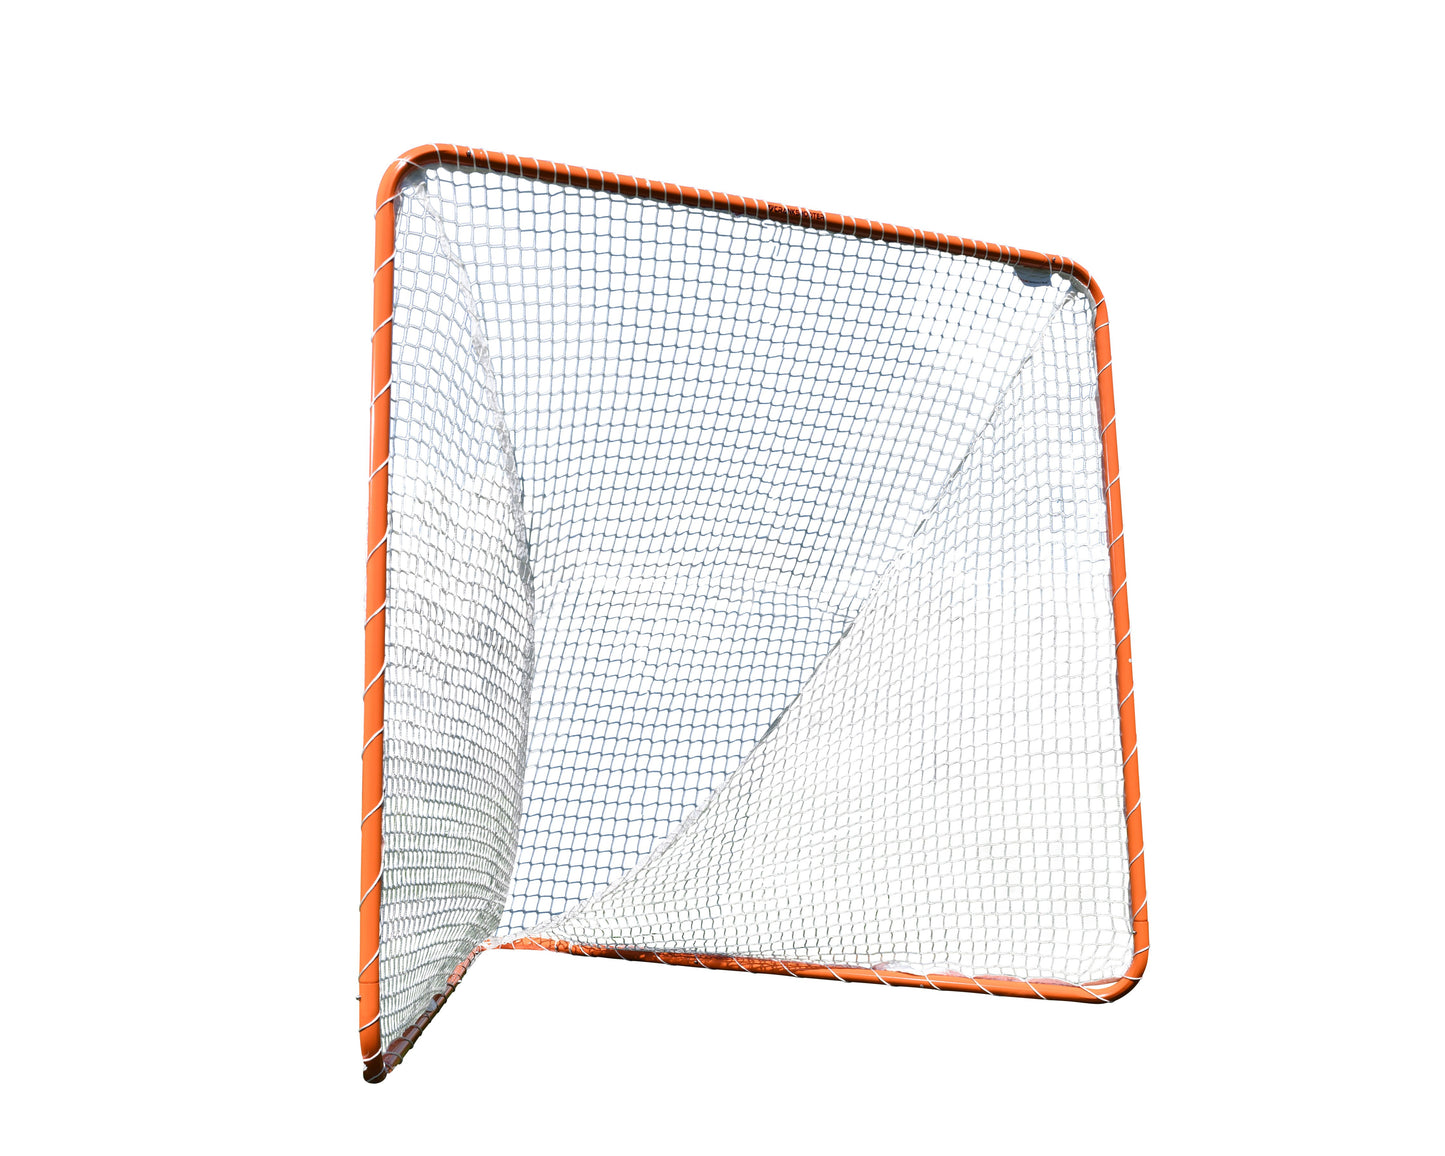 Pop-Up Backstop 21' x 11' & Backyard Goal With 4mm Net COMBO - Most Popular Combo - FREE SHIPPING